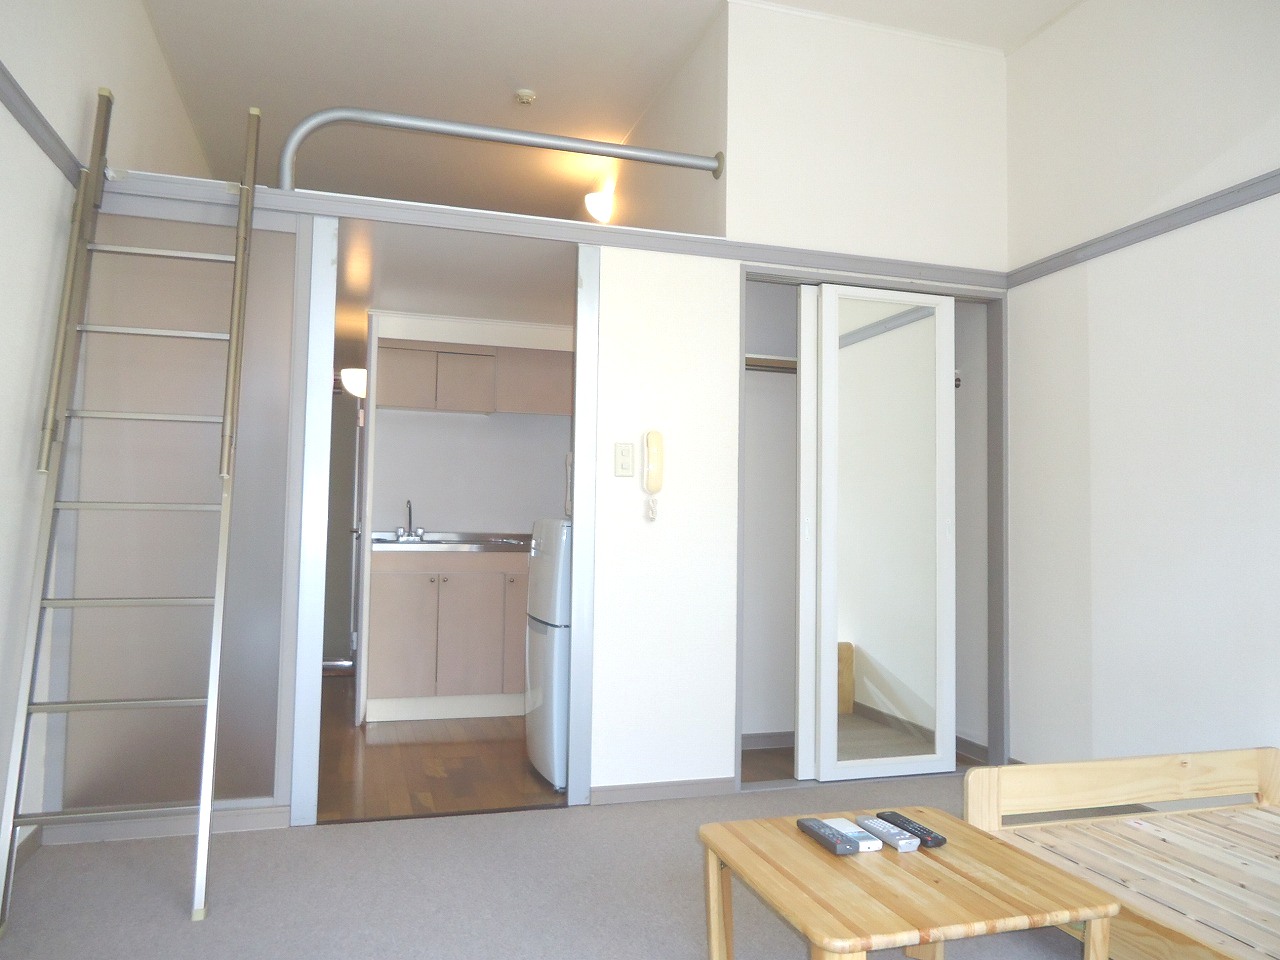 Living and room. Storage but also with plenty of full-length mirror (* ^. ^*)